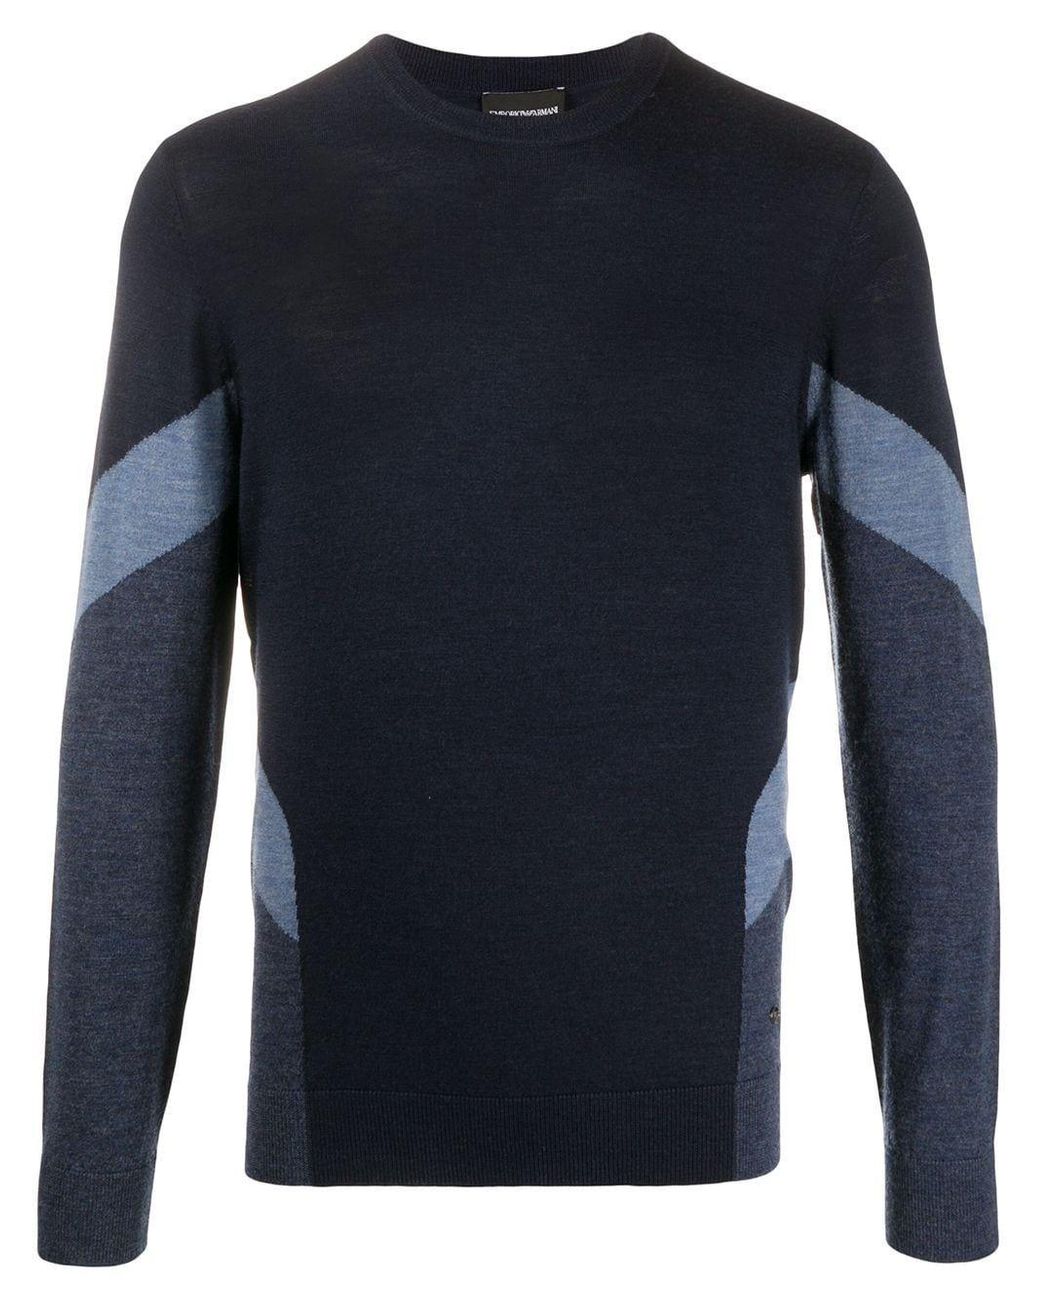 Emporio Armani Wool Sweater in Blue for Men - Lyst